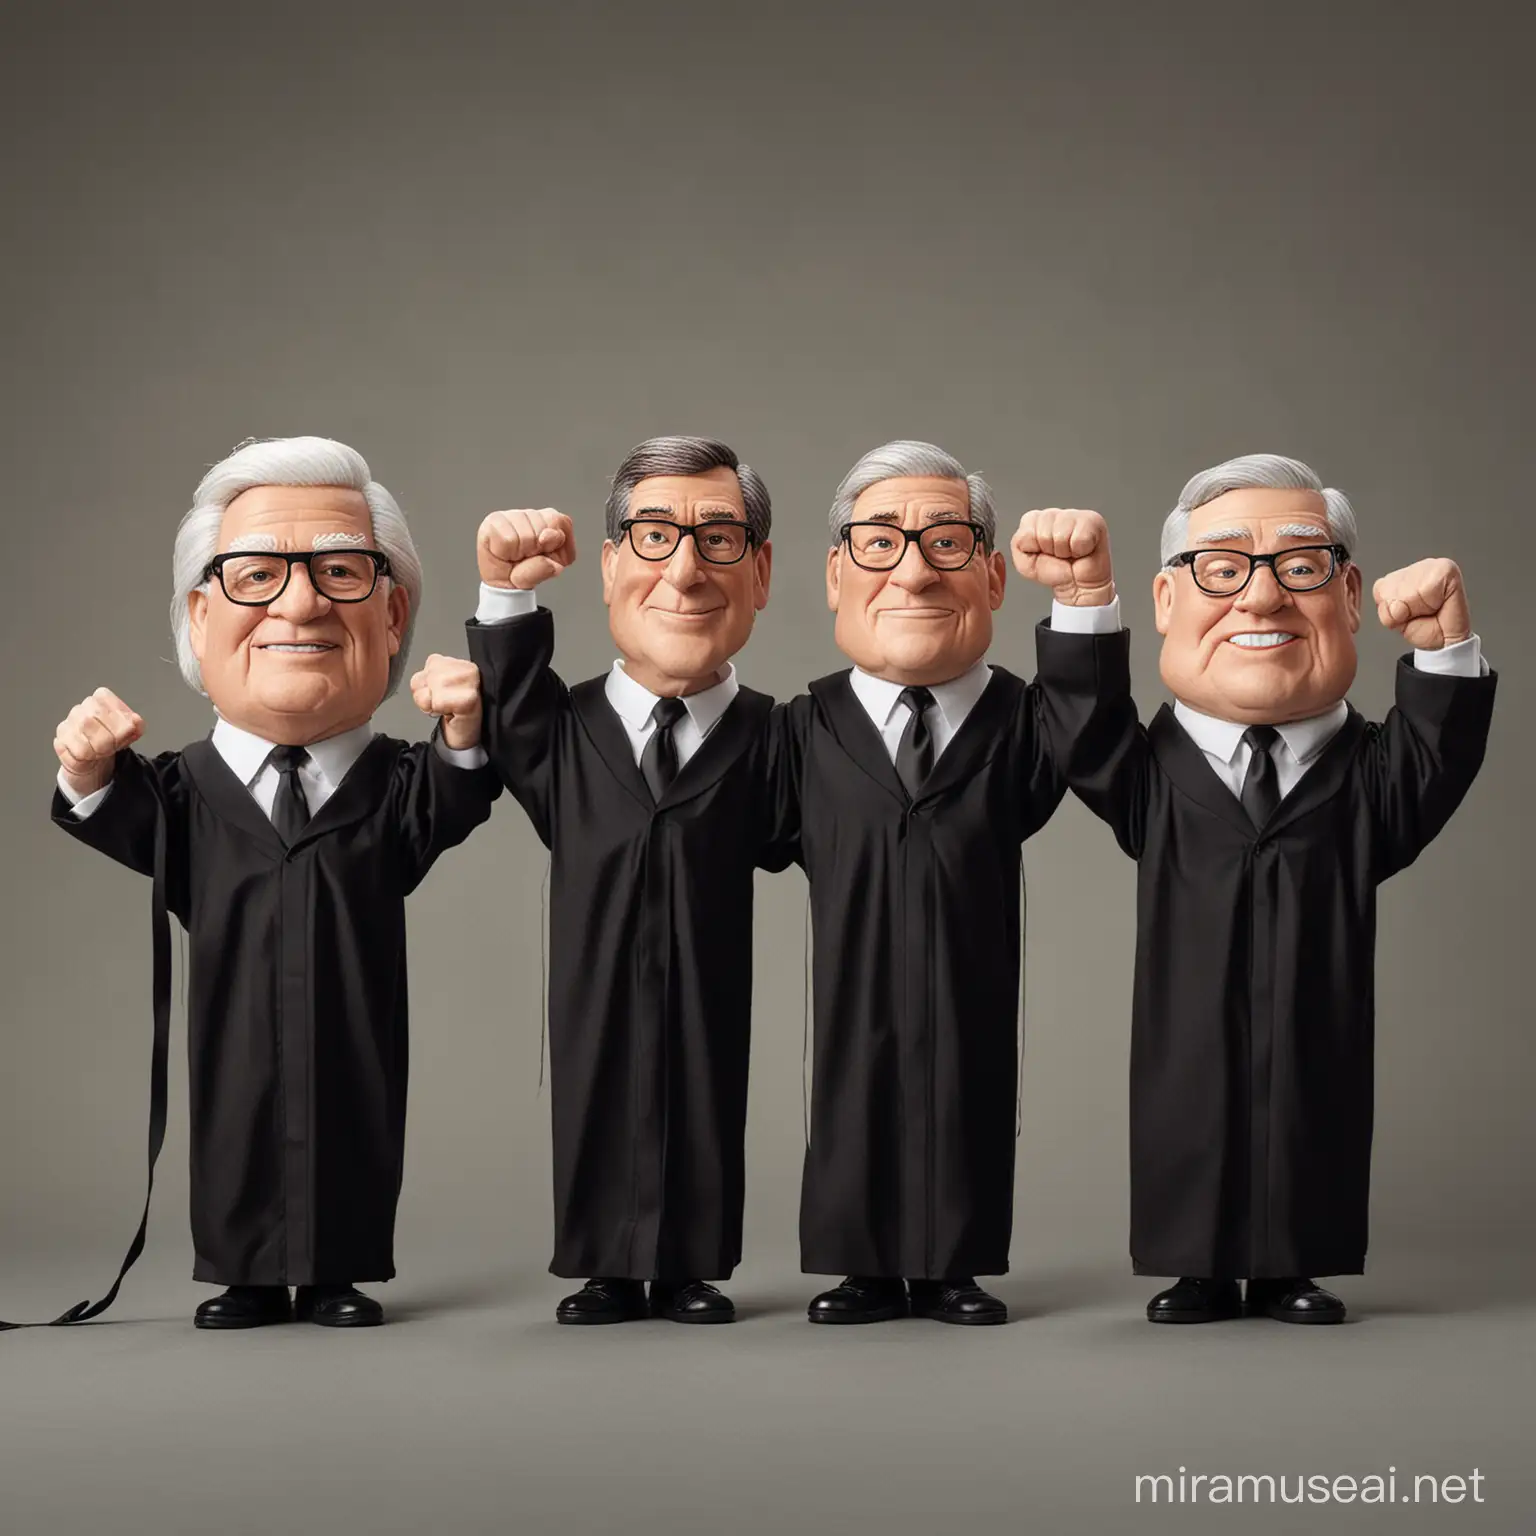 United States Supreme Court Justices depicted as puppets flexing their biceps